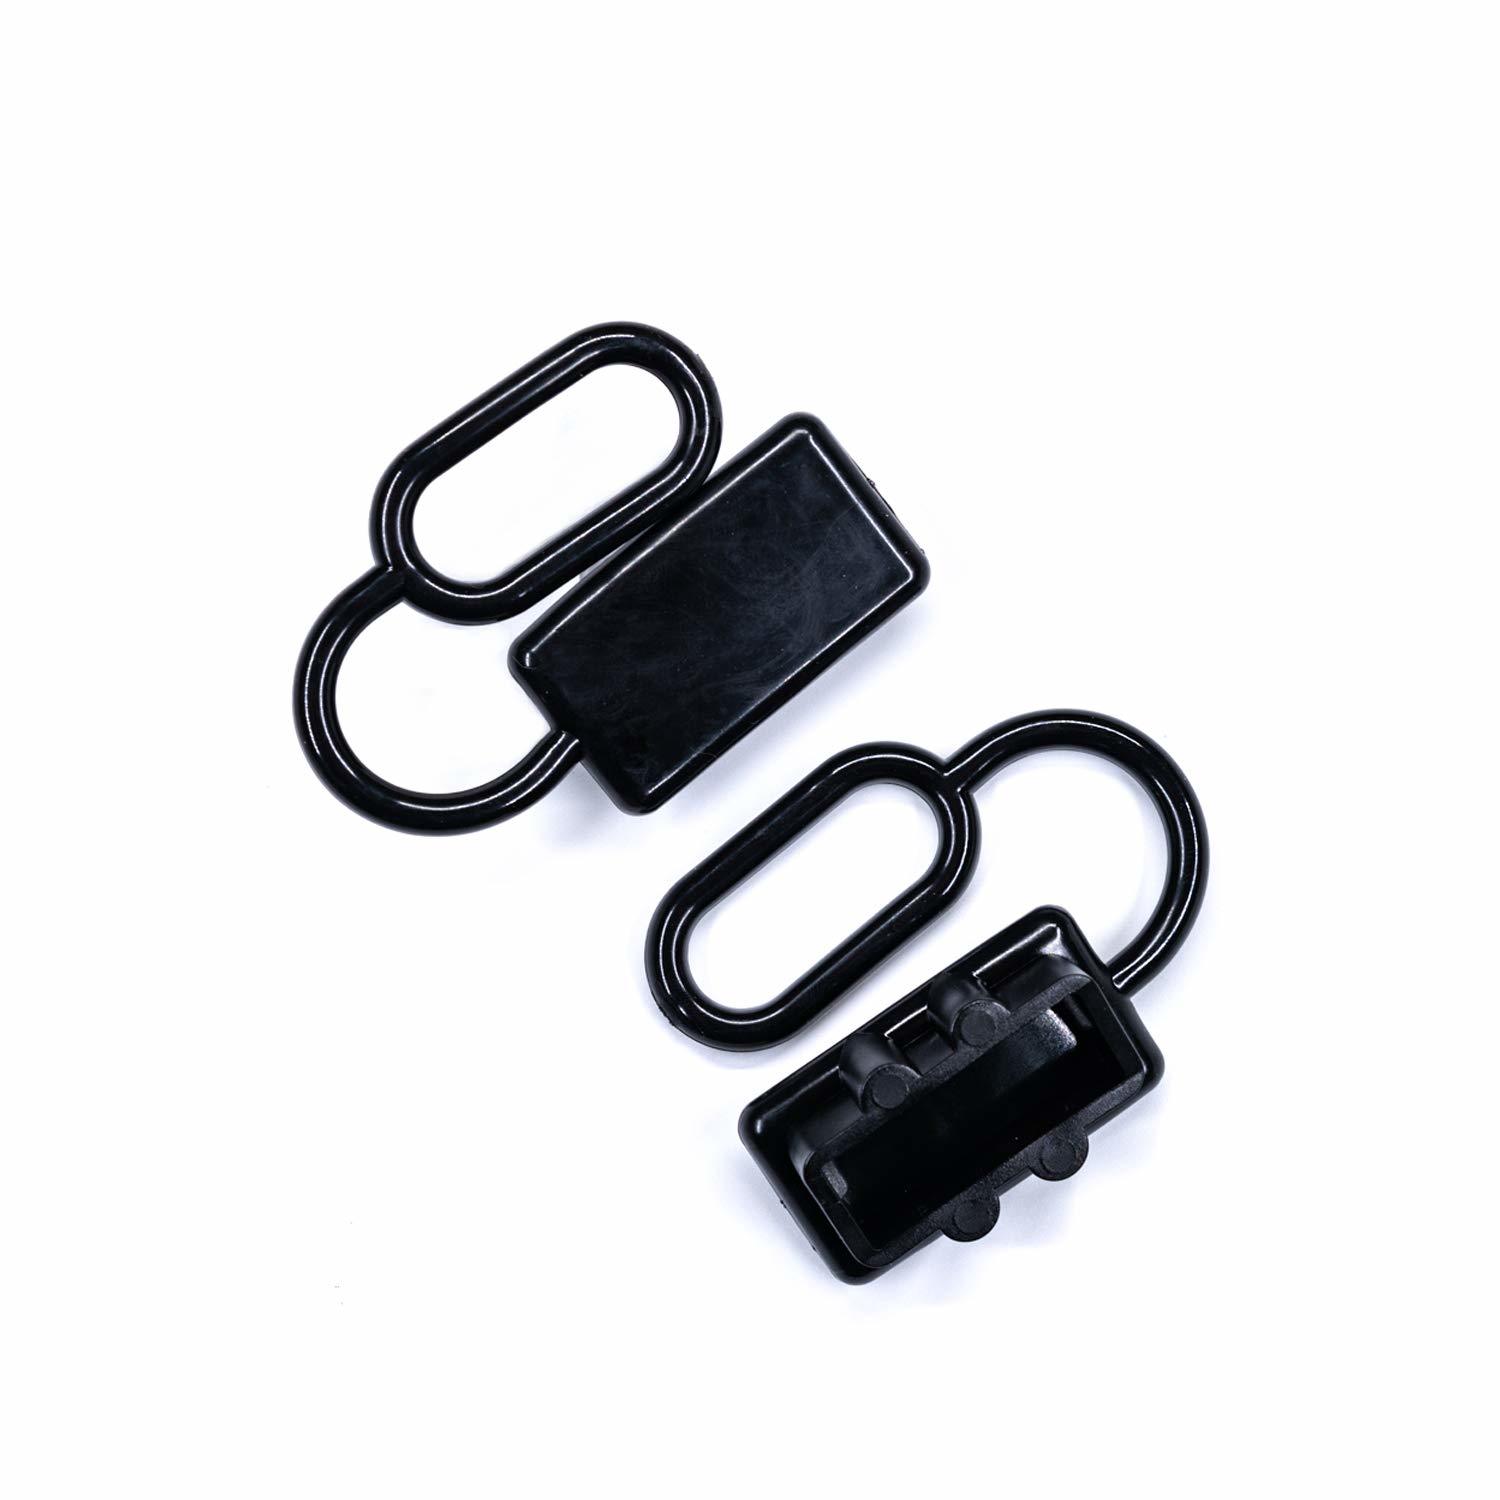 10 Pcs Rubber Cover Dust For 50 Amps Battery Quick Connector (Black)